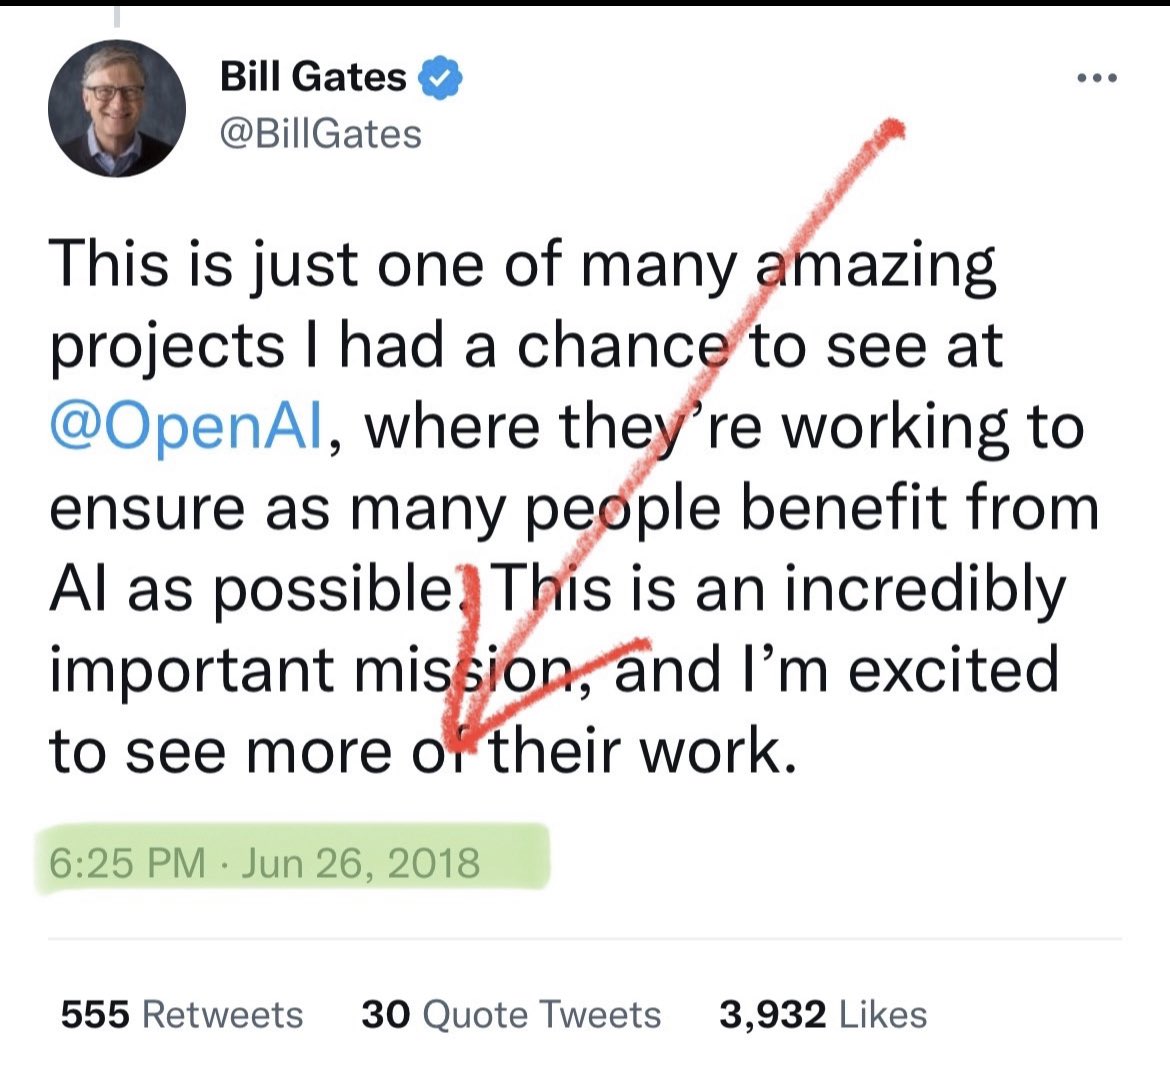 Less than 5 years ago, Bill Gates was blown away by what the OpenAI team were working on…

A few months later, Microsoft invested $1 billion in OpenAI.

TODAY Microsoft is investing $10 billion!

I feel blind… 

What can they see ahead?

#BeBusinessSmart